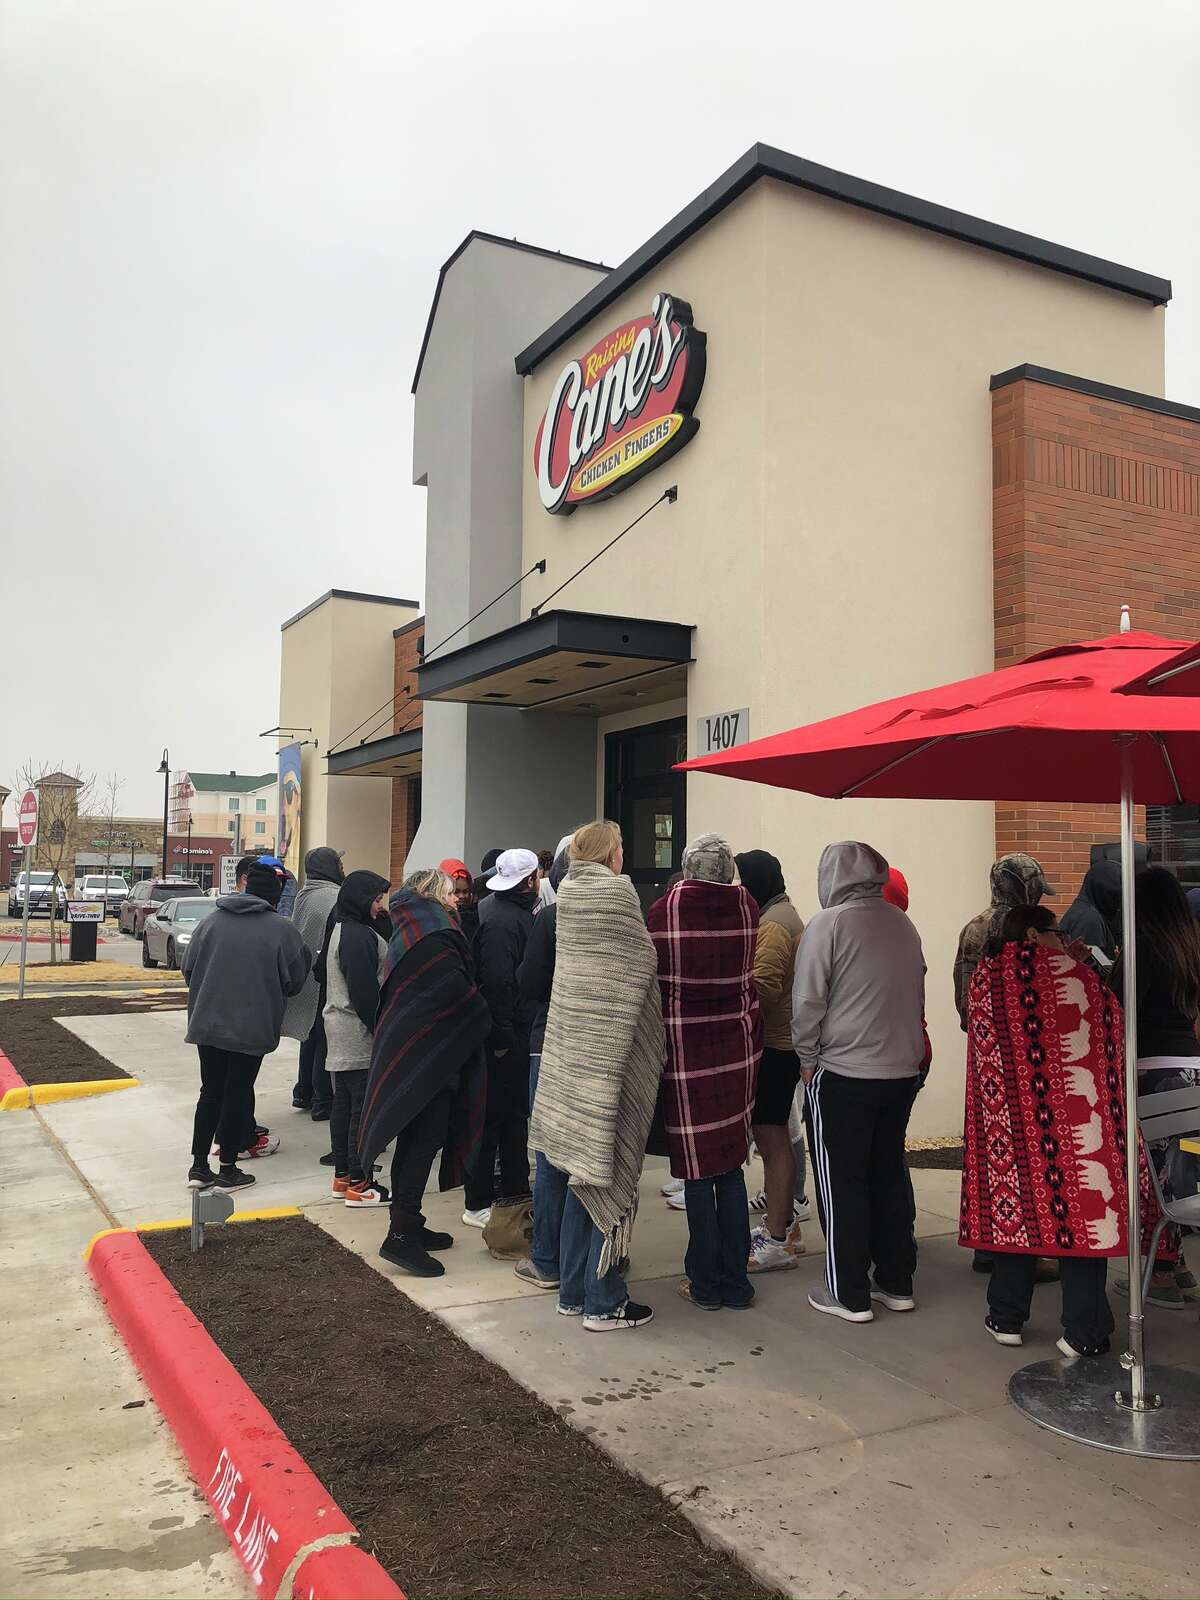 Raising Cane's Chicken Fingers opened Feb. 4 in Midland.